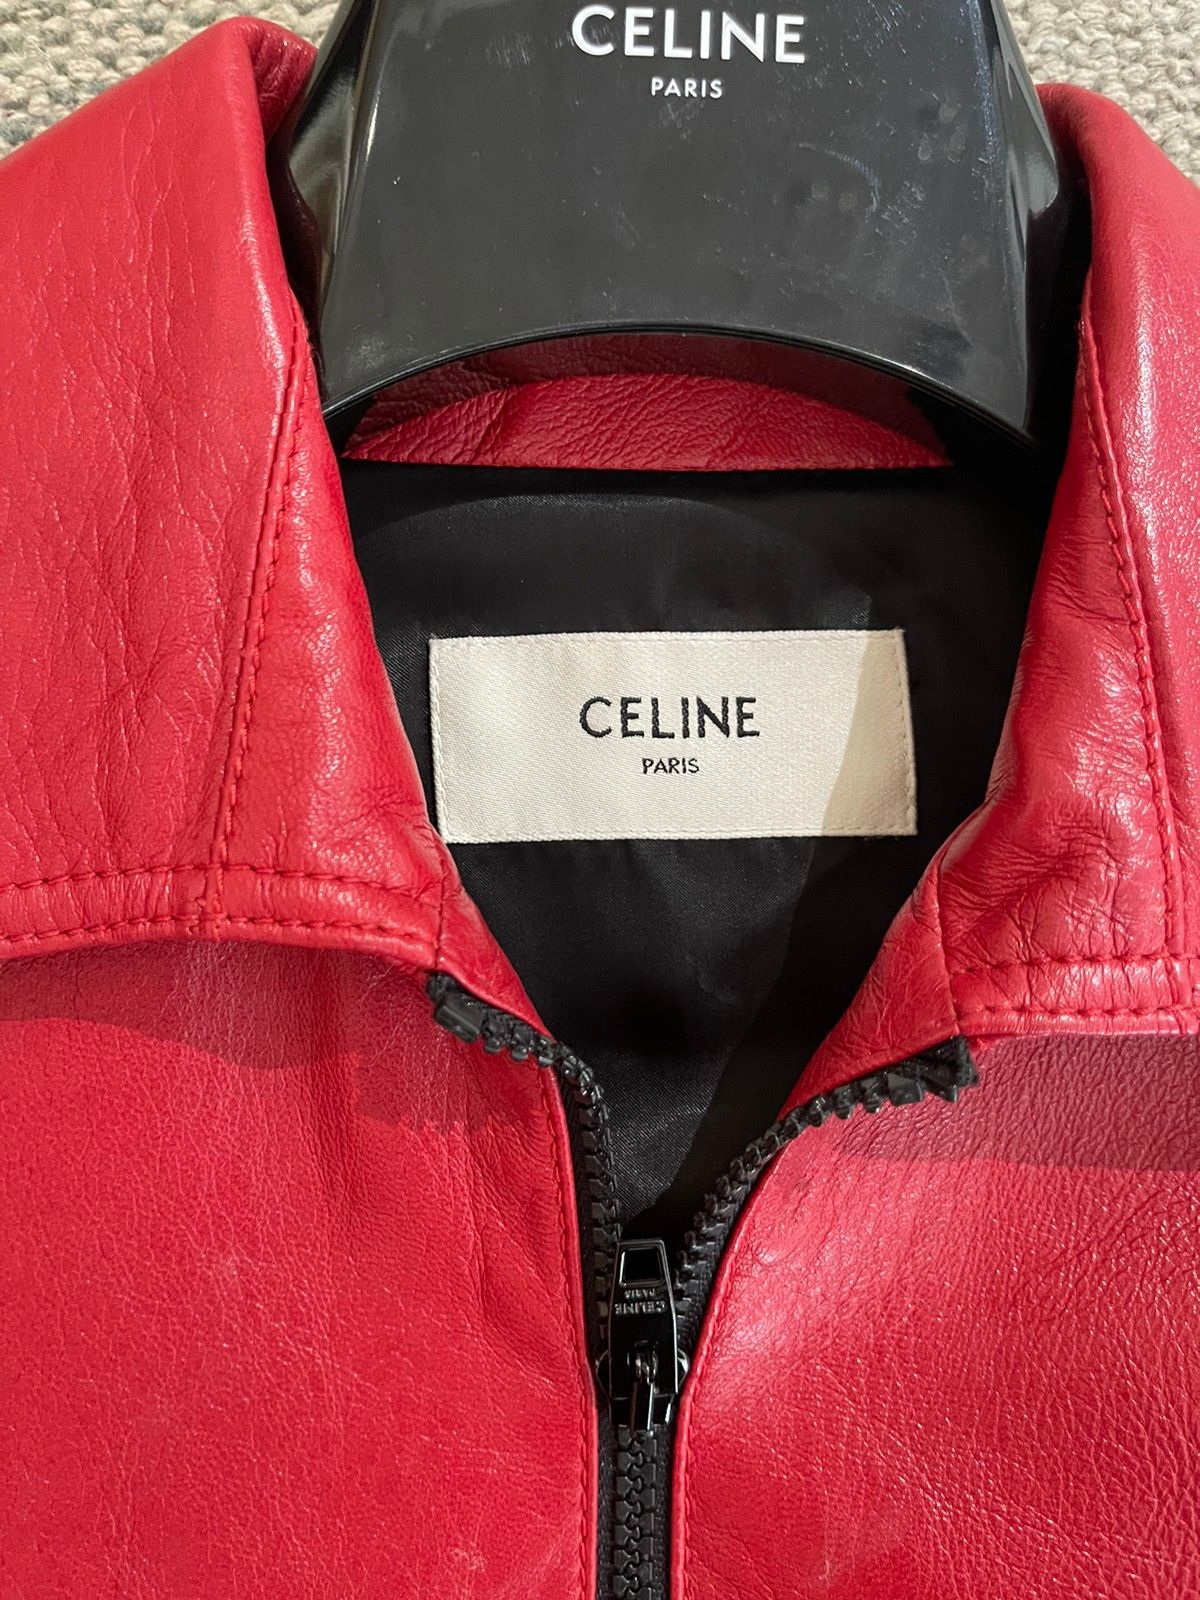 Celine FW20 Hedi NEW 1/1 Red Leather Center Zip Jacket